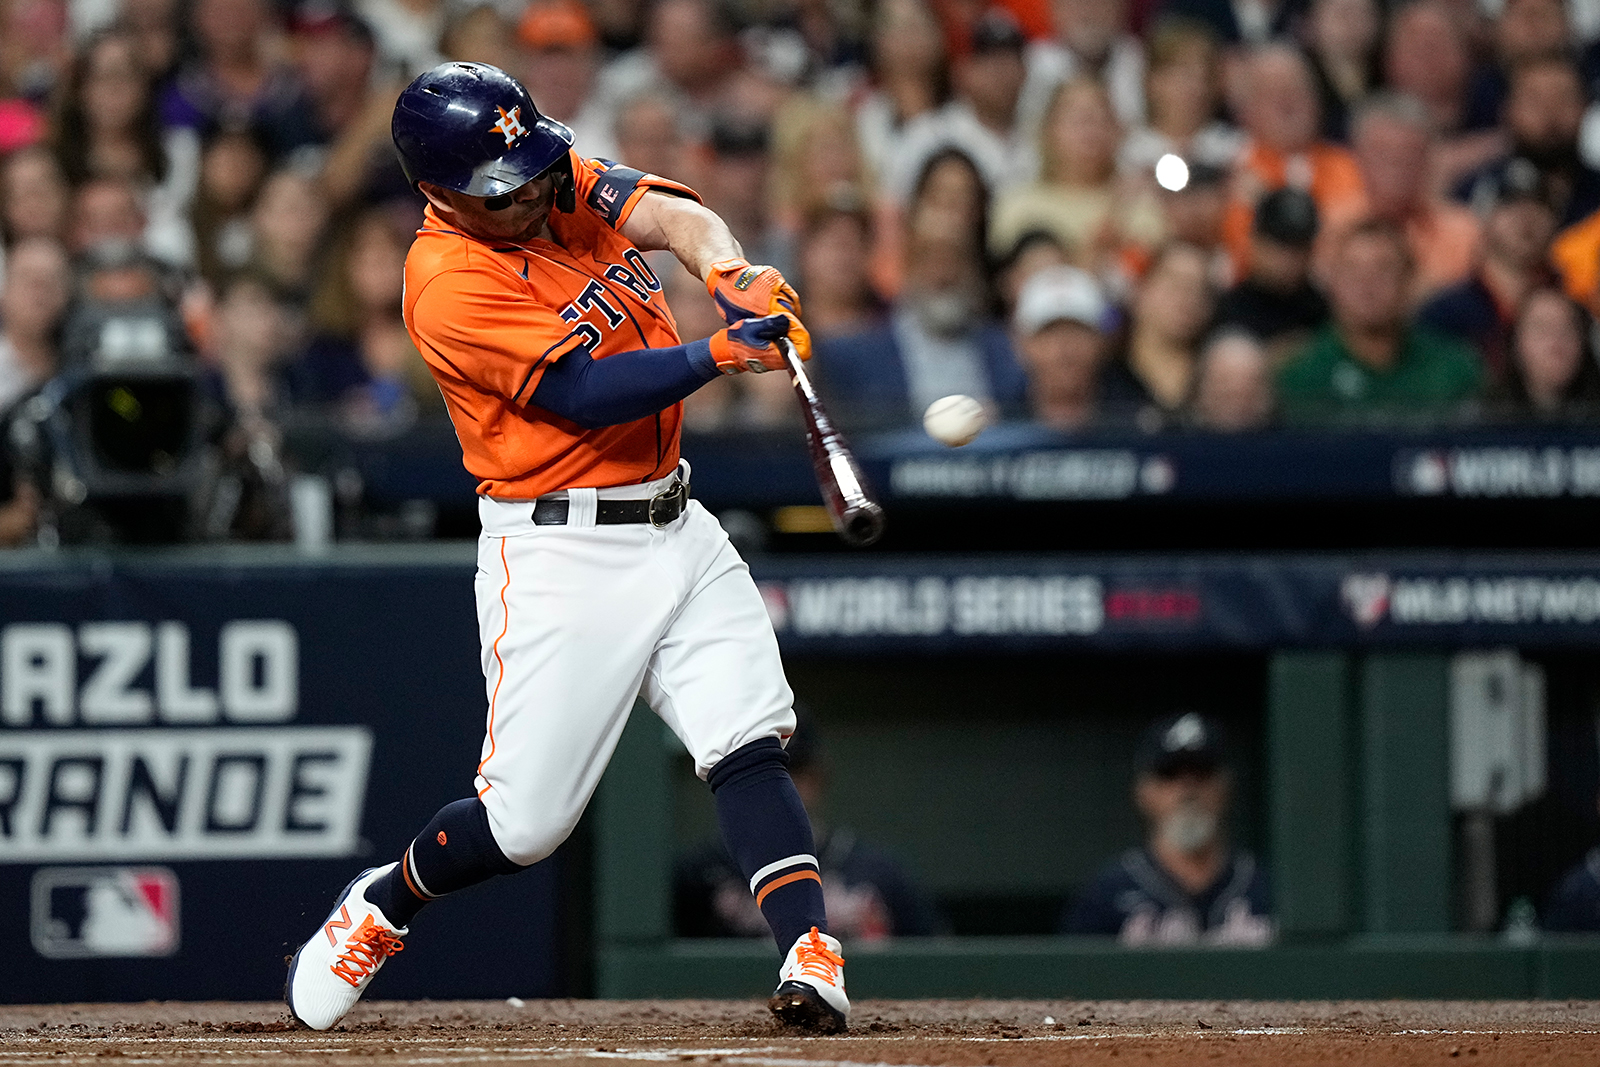 Houston Astros' Jose Altuve hits a double during the first inning in Game 2.